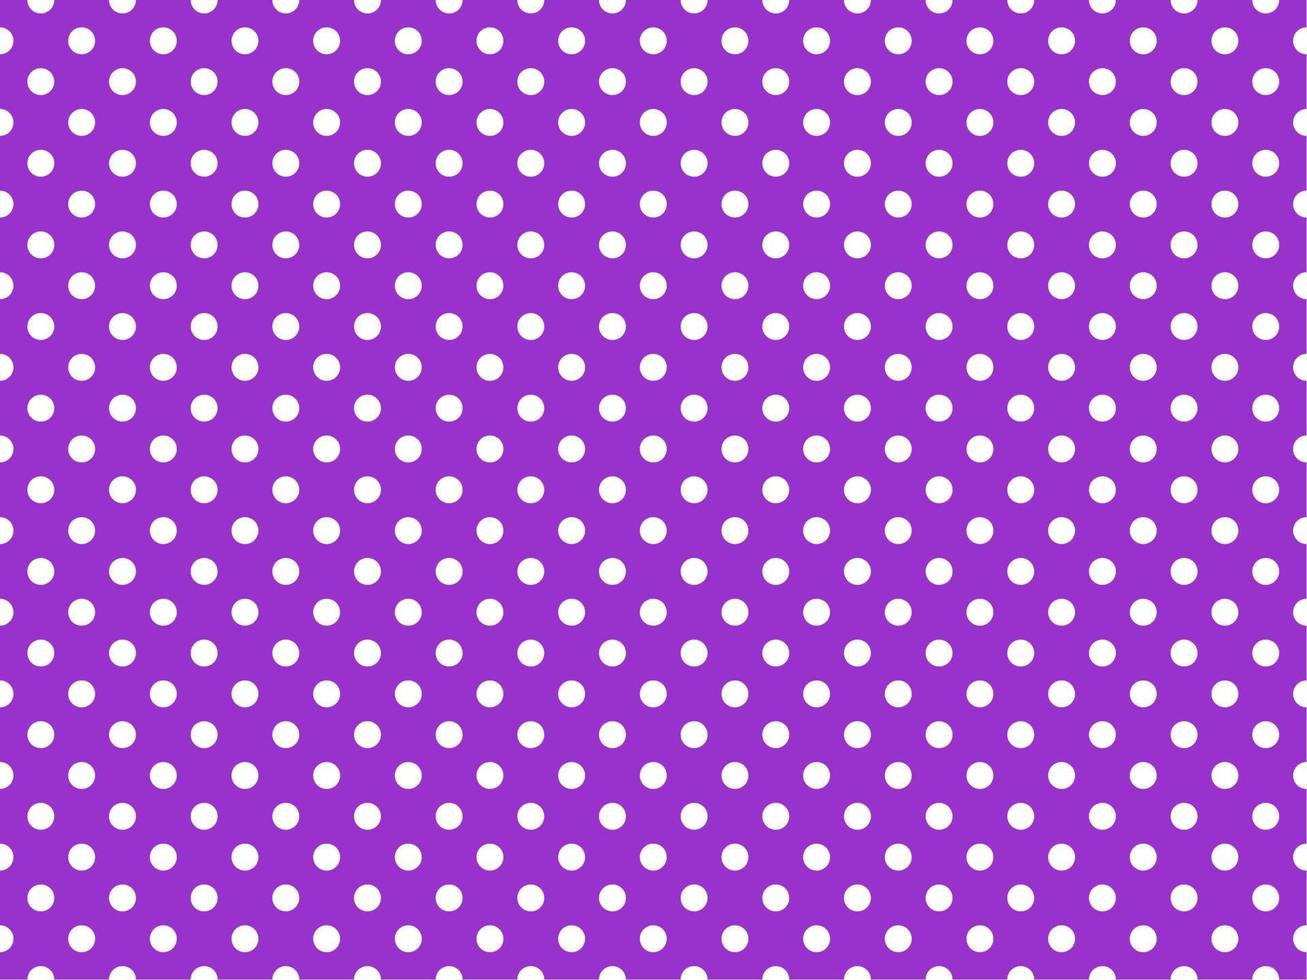 white polka dots over dark orchid background vector